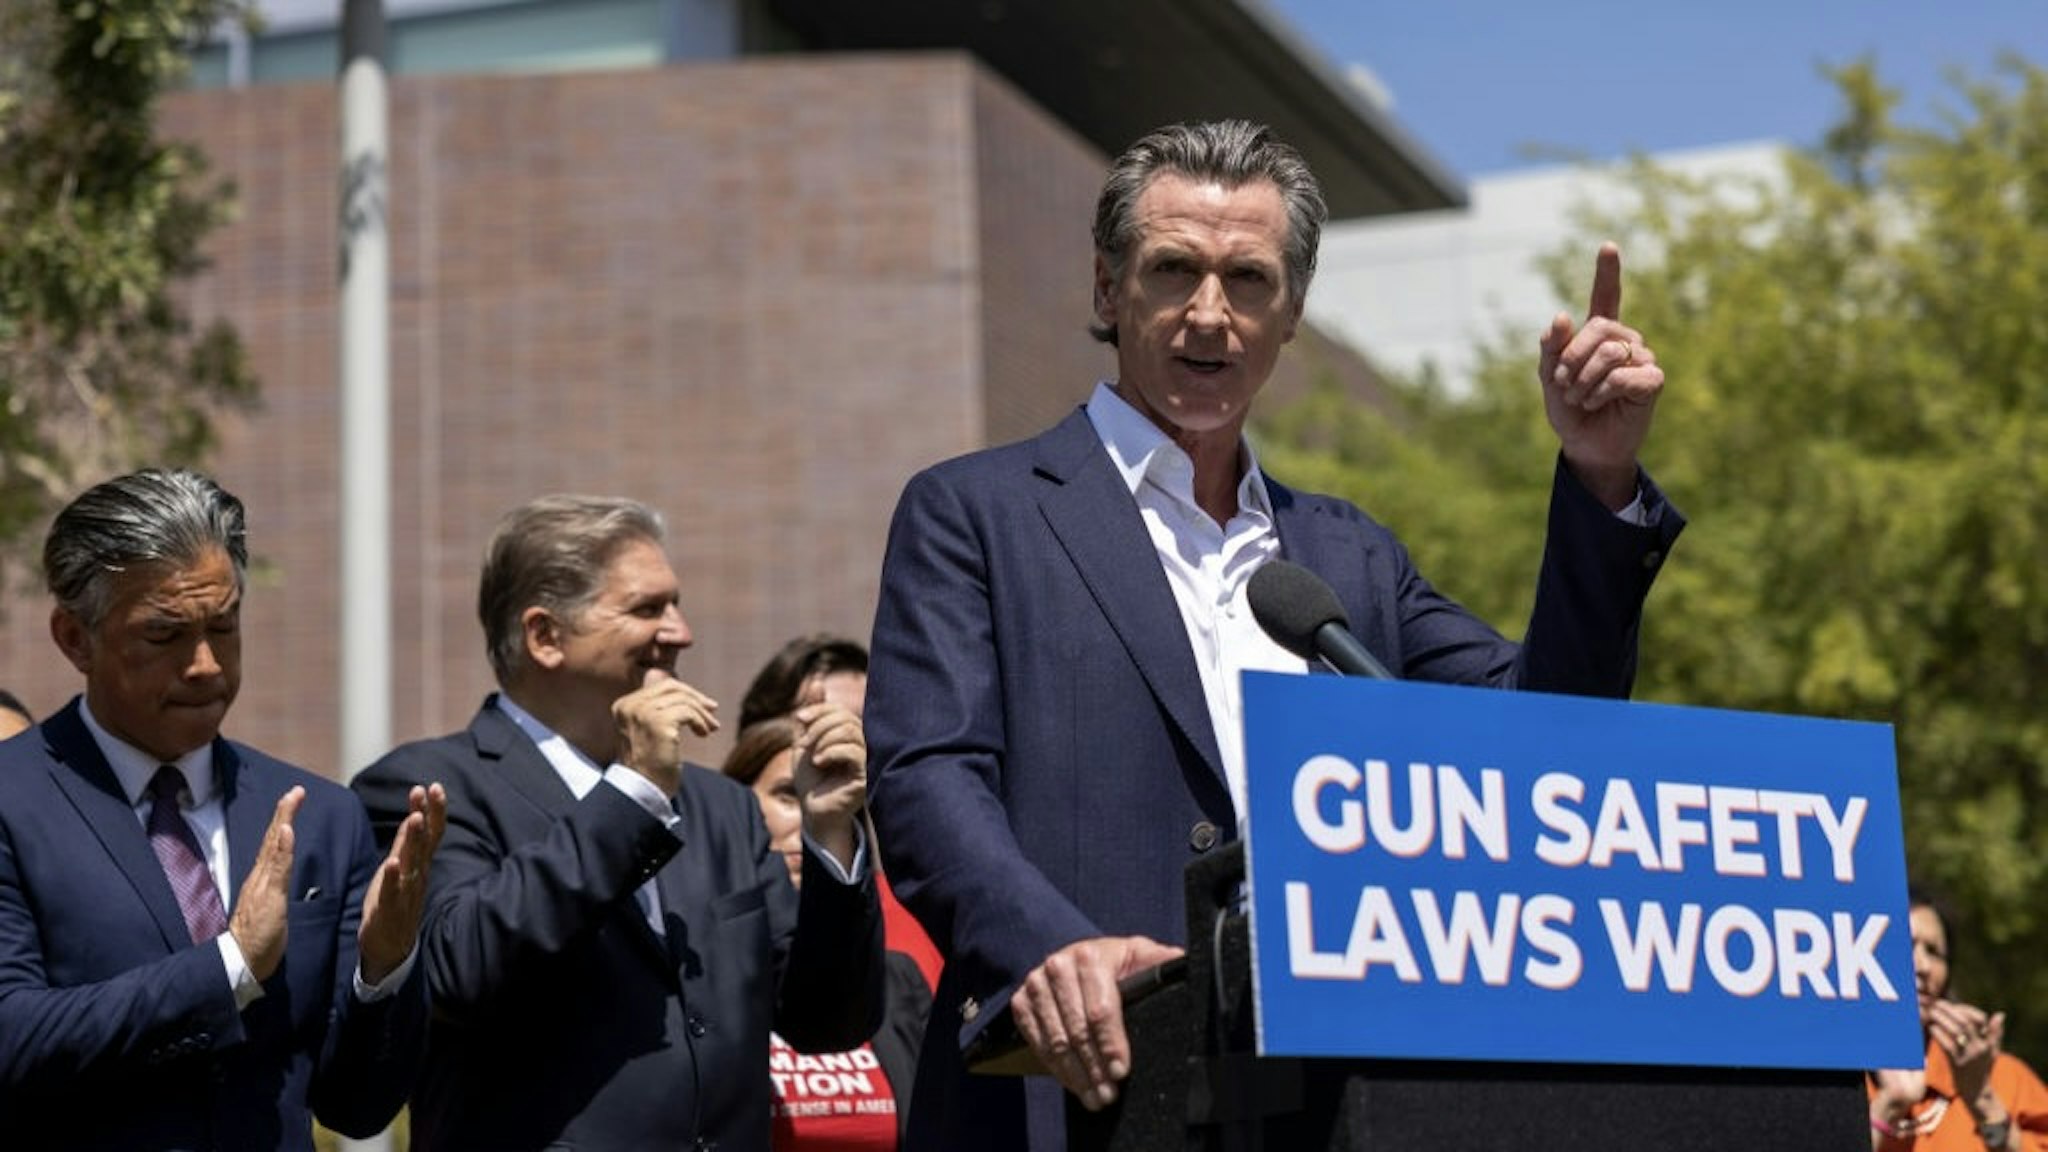 California Gov. Newsom Highlights New State Efforts To Stem Gun Violence LOS ANGELES, CA - JULY 22: California Attorney General Rob Bonta (L) and Senate Majority Leader Emeritus Bob Hertzberg applaud as California governor Gavin Newsom address a news conference where he signed SB 1327 into law on July 22, 2022 in Los Angeles, California. During the conference, Newsom signed SB 1327, which allows private individuals to sue one another for the illegal manufacture or sale of guns in California, using the principal that the Supreme Court allows for Texas in pursuing people who have had or helped in an abortion. Following a series of high-profile mass shootings across the nation, the governor has signed a set of bills establishing laws meant to reduce gun violence. Included are laws restricting ghost guns, a 10-year prohibition on gun possession for individuals convicted of child or elder abuse, and prohibiting gun the industry from advertising to minors. Gun violence is the leading cause of death among children in the U.S., and in Los Angeles, 30 percent of shootings involve ghost guns. (Photo by David McNew/Getty Images) David McNew / Contributor